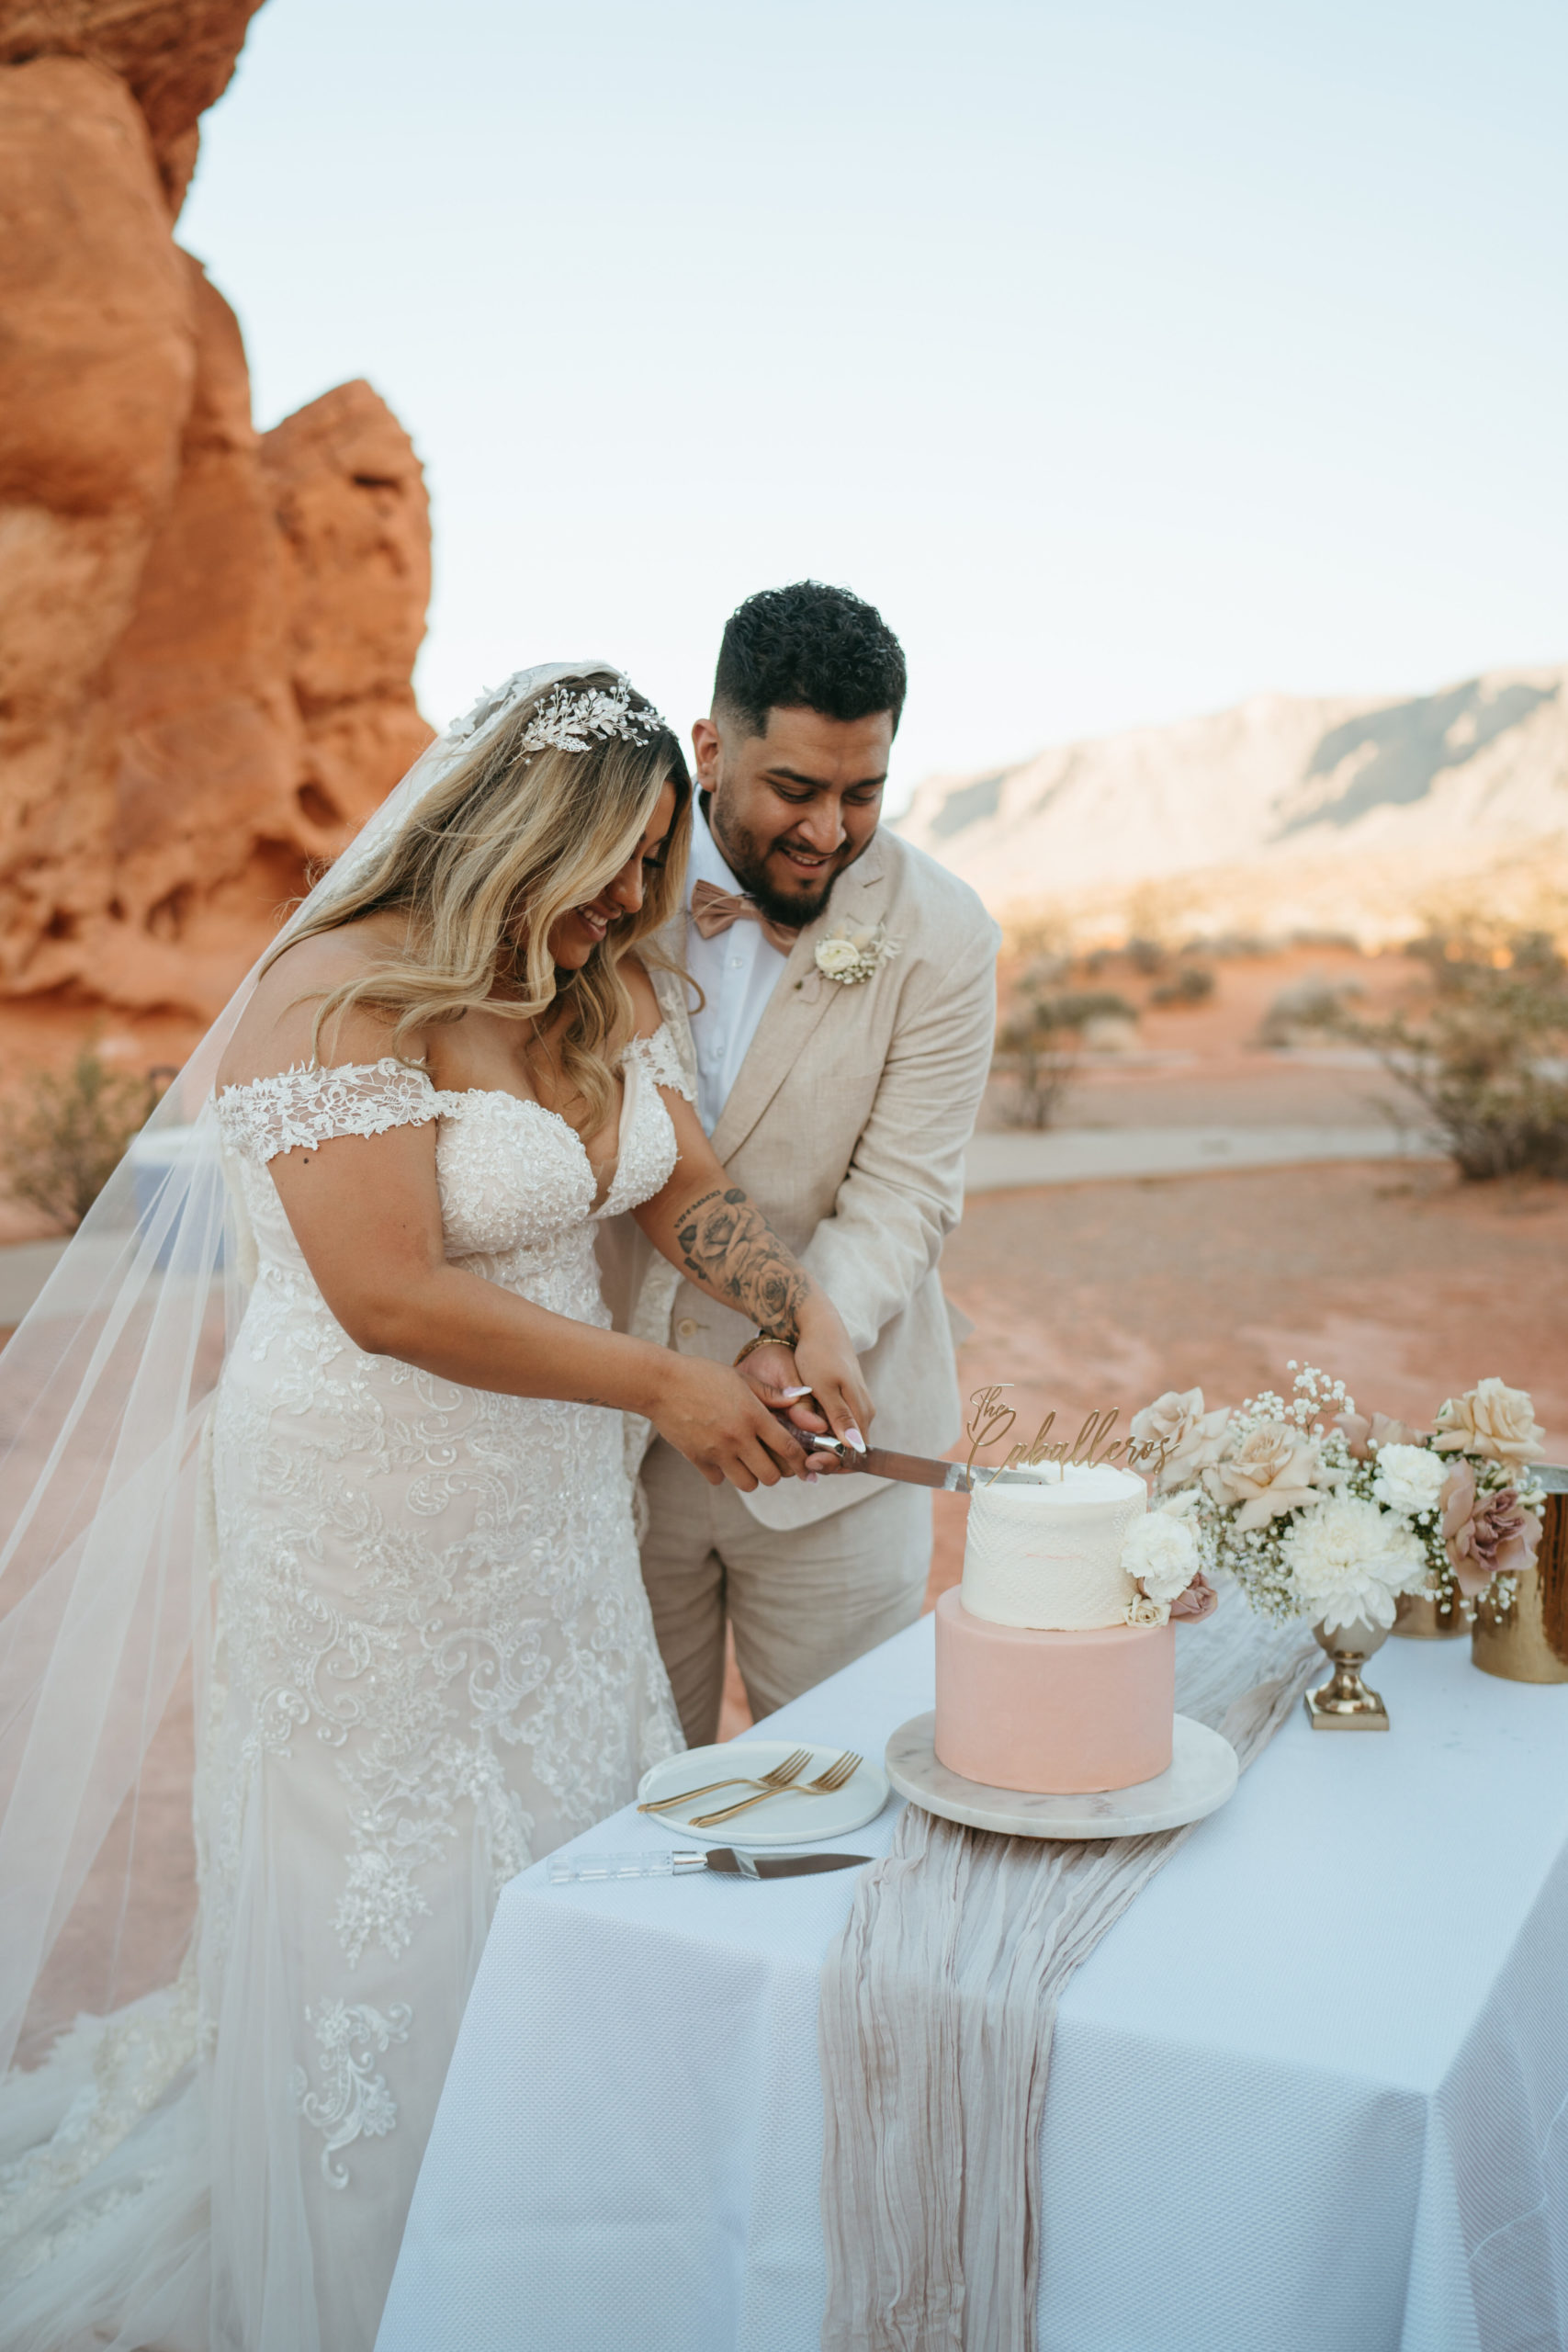 Modern Monochromatic Desert Micro-Wedding. Bride and groom cut the two tier cake at the cake table 